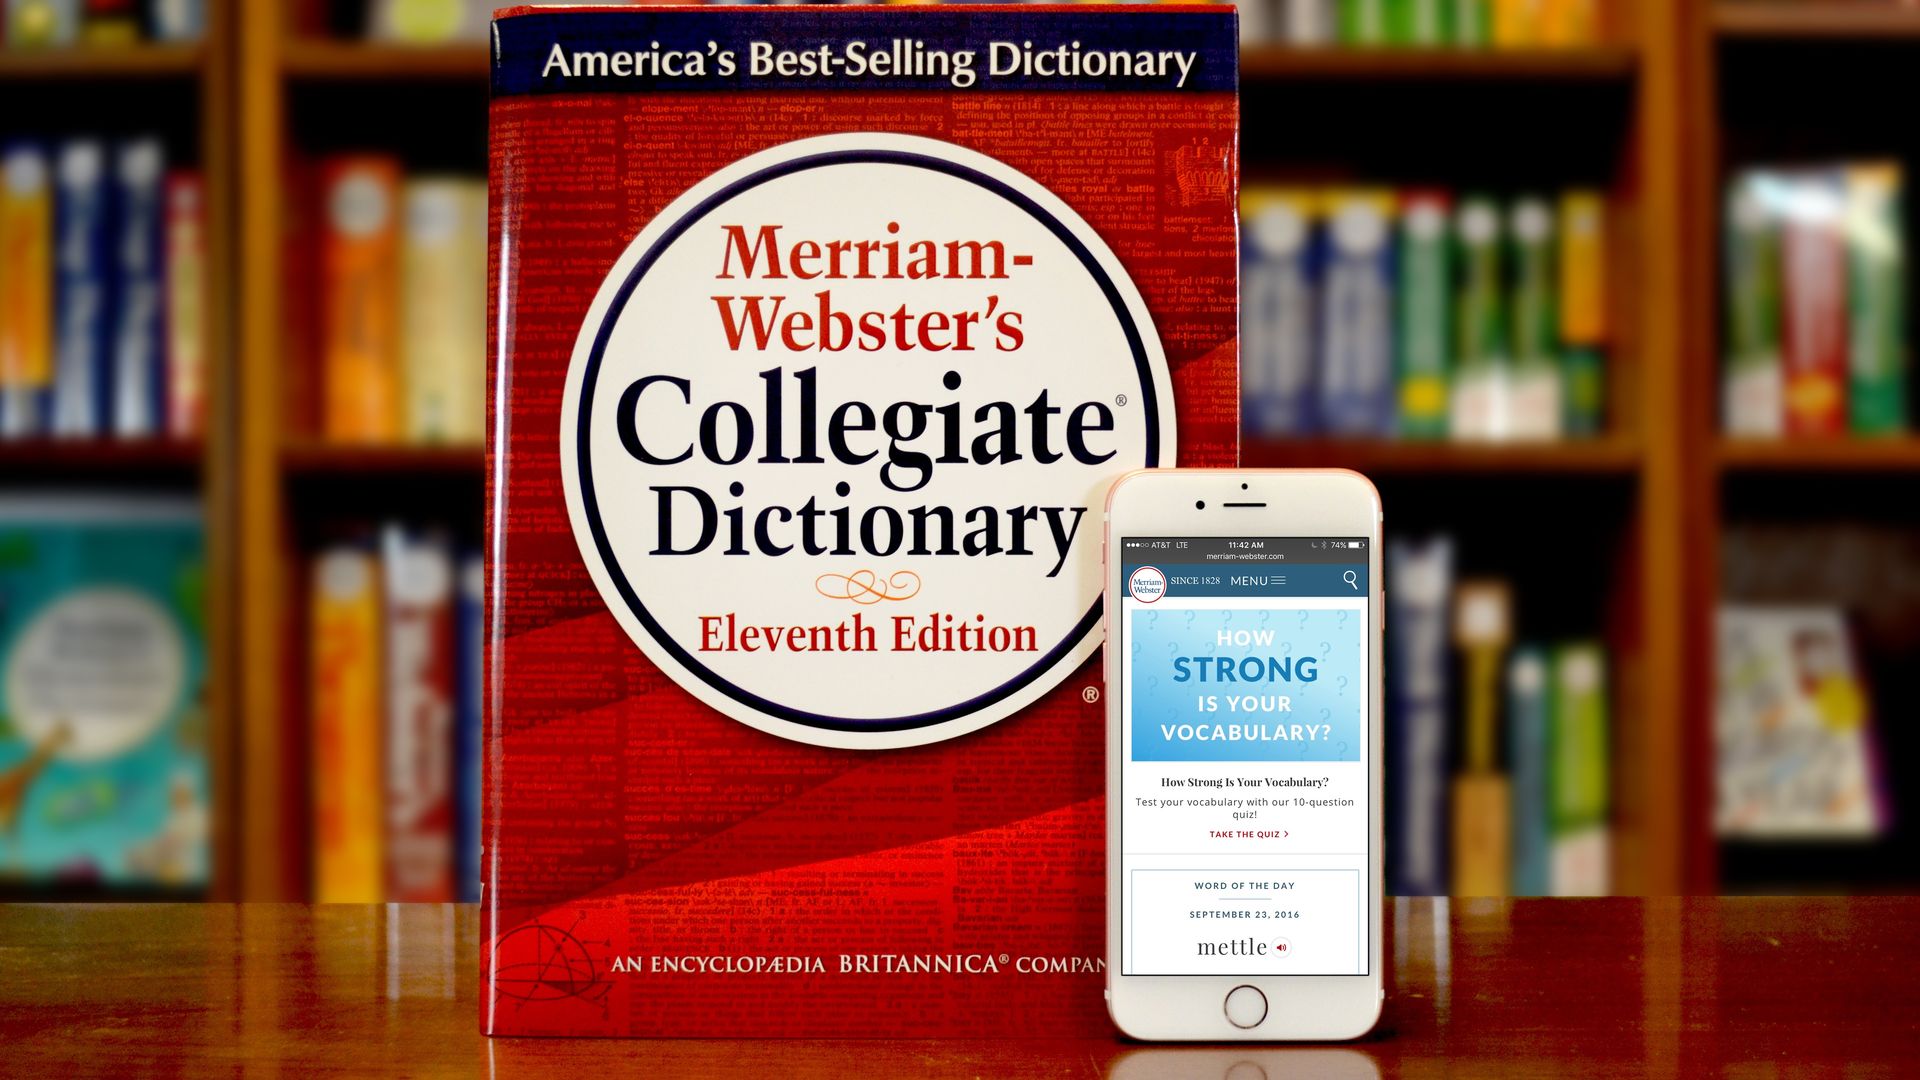 Merriam-Webster's Collegiate Dictionary and mobile website are displayed September 23, 2016 in Springfield, Massachusetts.